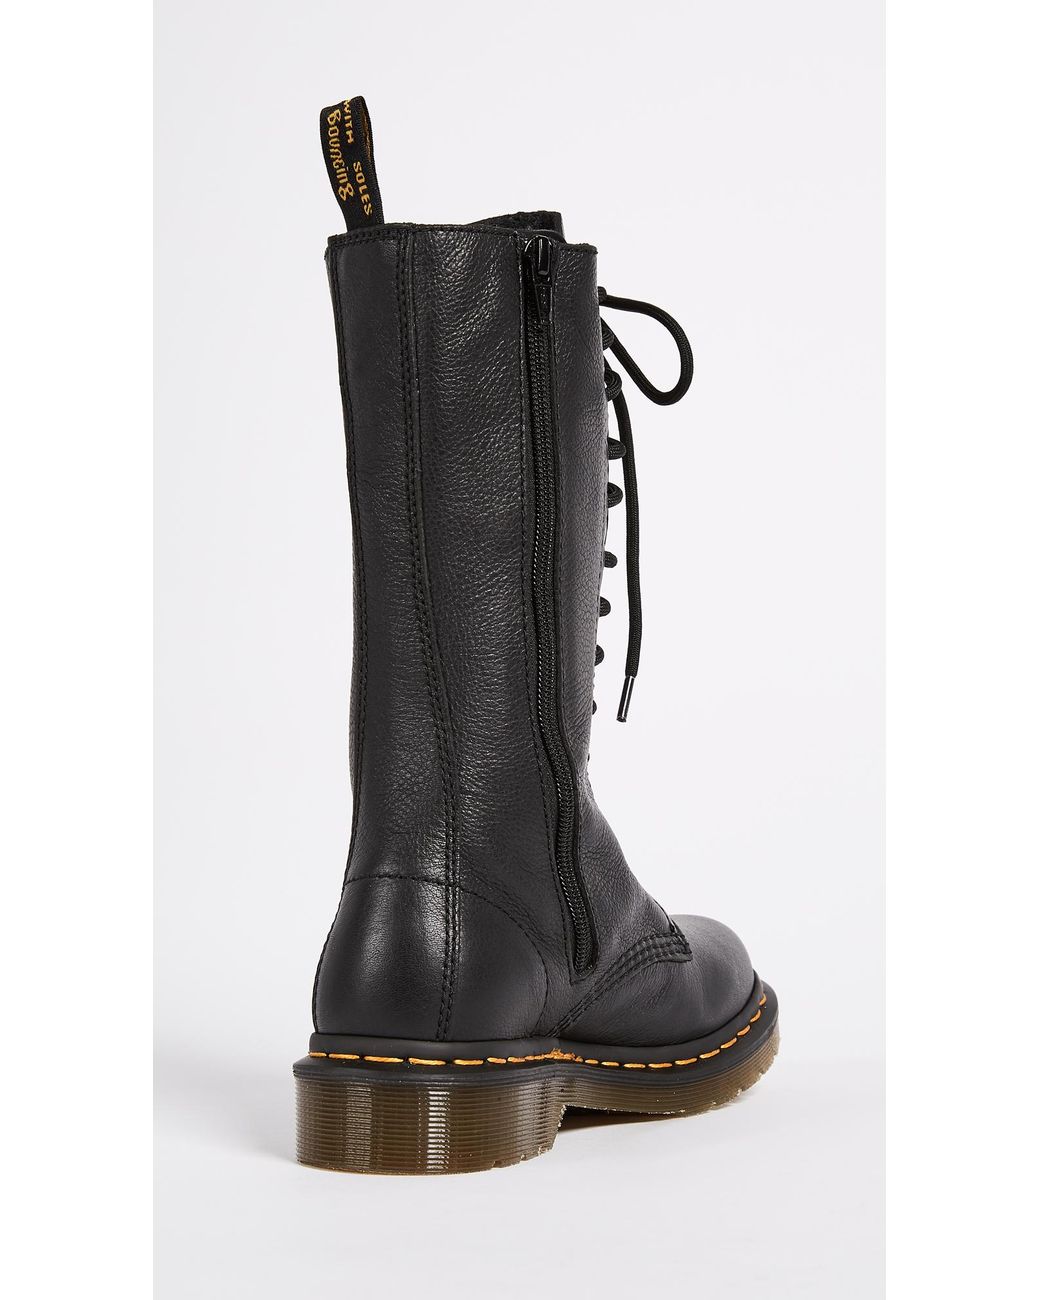 Dr. Martens Leather 1b99 14 Eye Zip Boots in Black | Lyst